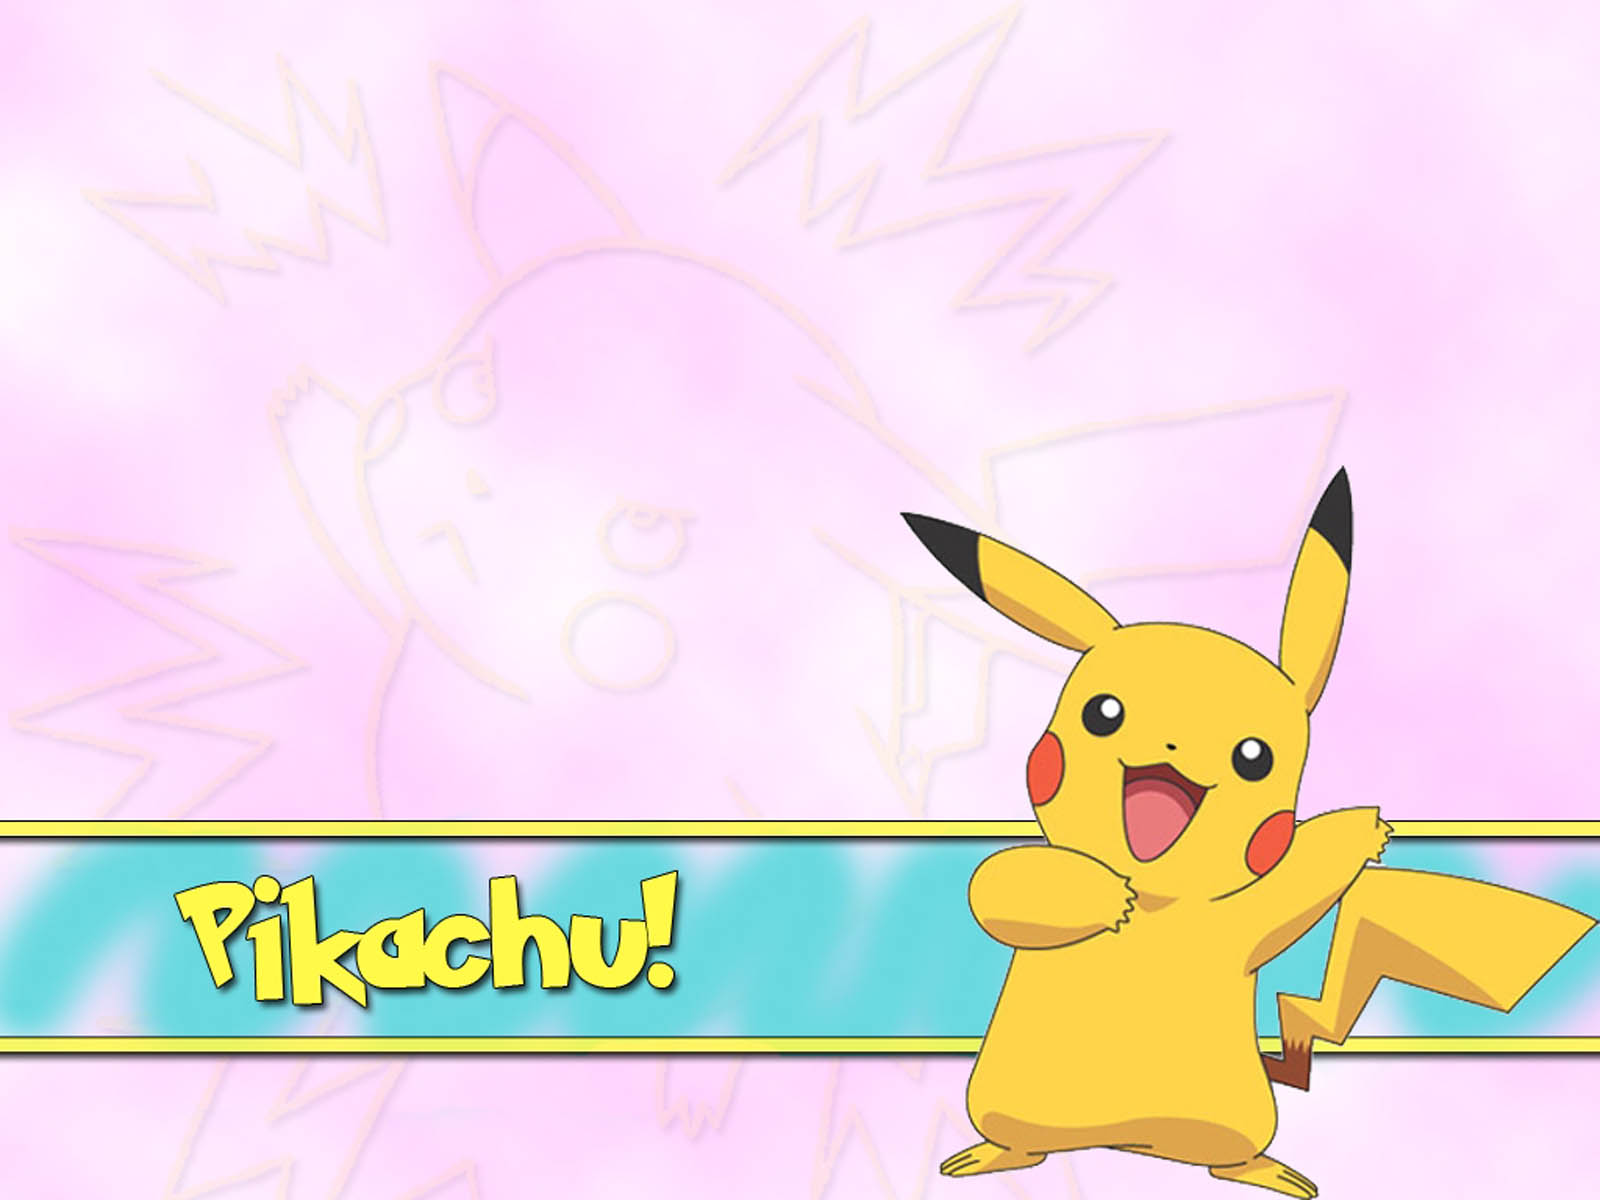 Pikachu Pokemon Wallpaper Image Photos Pictures And Background